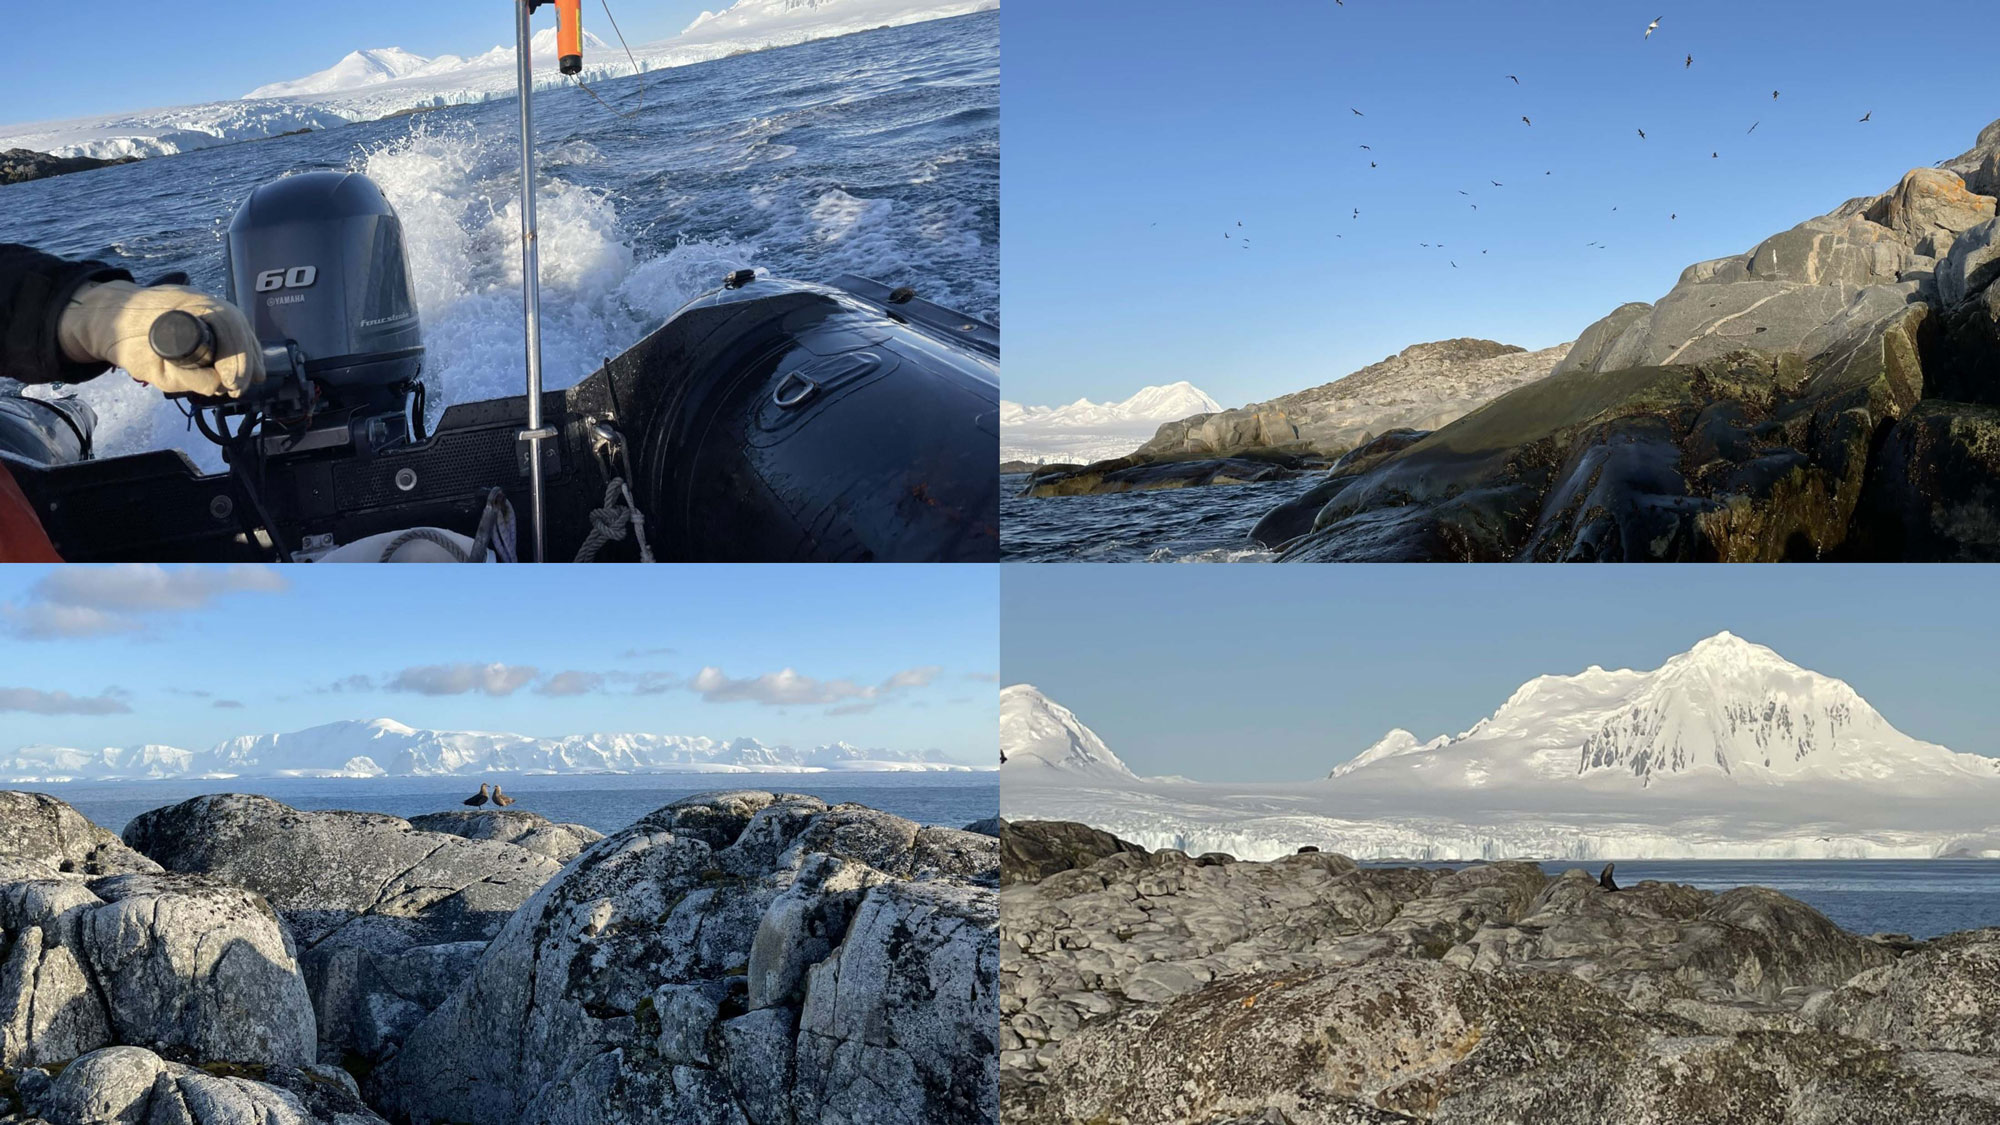 Composite image of four scenes depicting views from a black rubber boat powered by a 60 horsepower engine:  steel blue waters, towering snow covered mountains, rocky terrain, pair of brown birds in profile, numerous birds in flight against a blue sky.